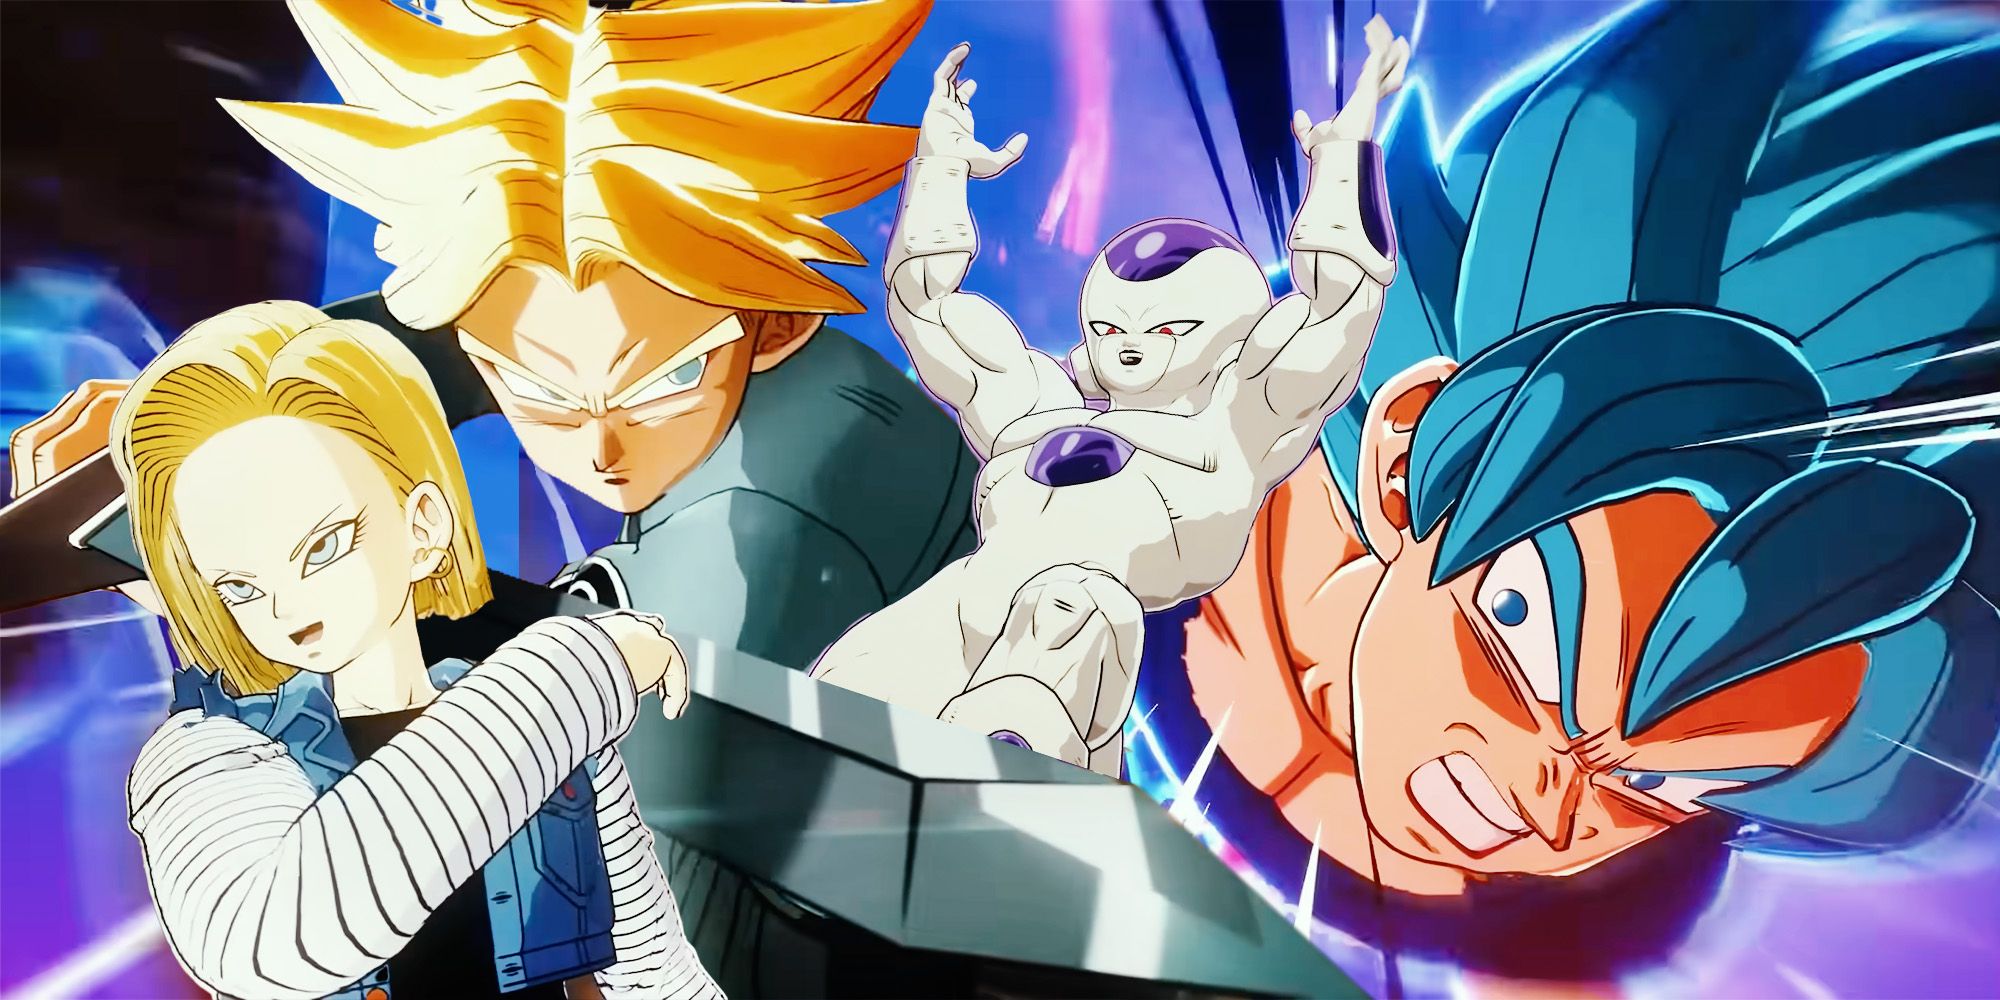 DRAGON BALL: SPARKING! ZERO is the earth-shaking sequel bringing